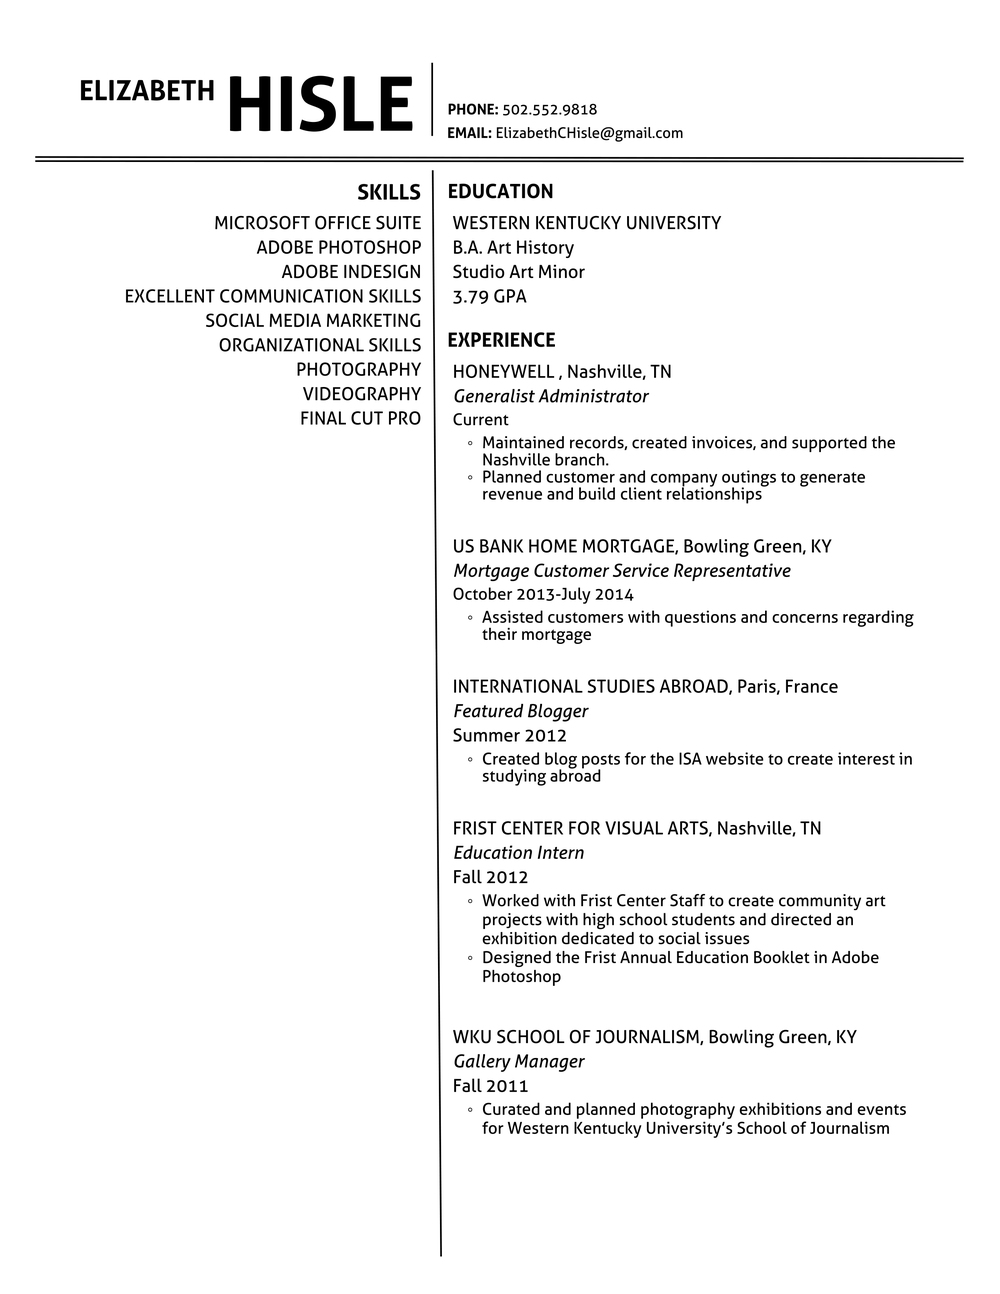 References provided upon request on resume